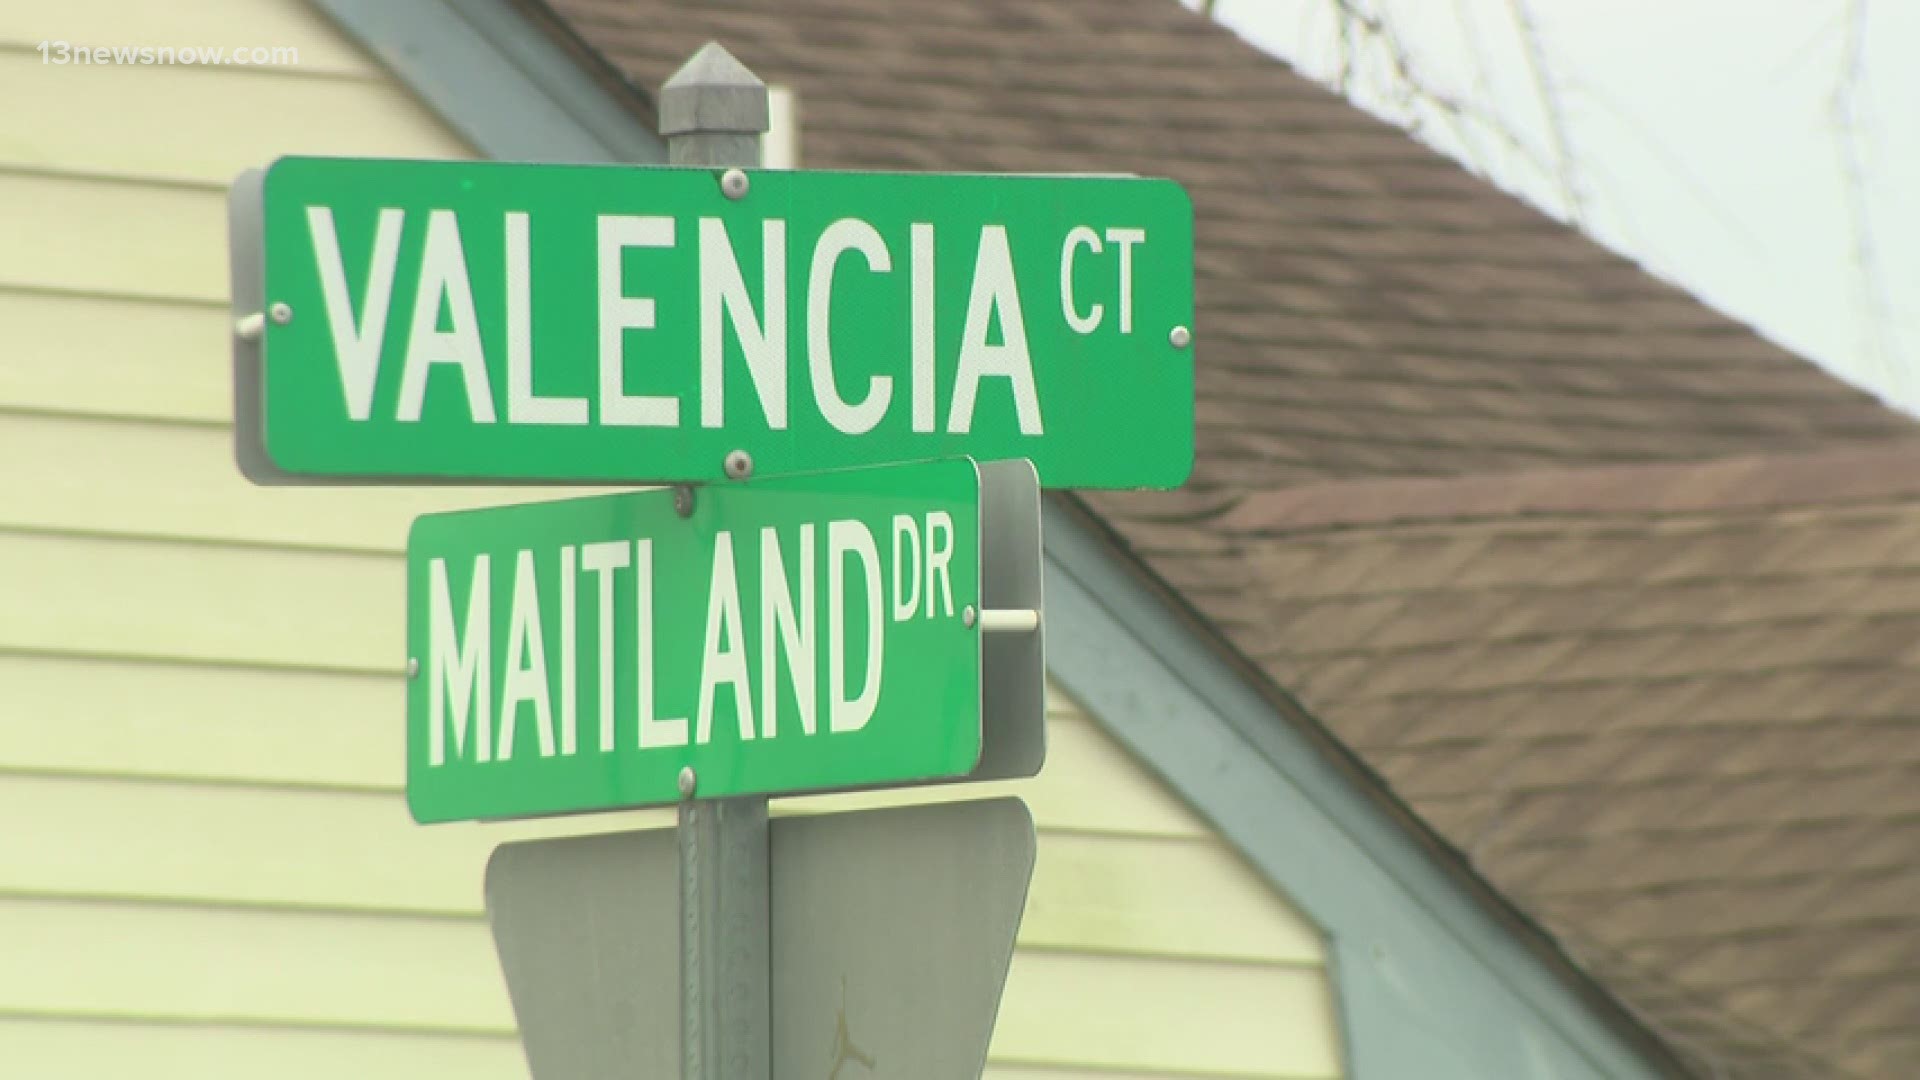 Police said the two incidents occurred at the 800 Block of Maitland Drive and the 1700 Block of Pathfinder Drive. They have not said if the incidents are connected.